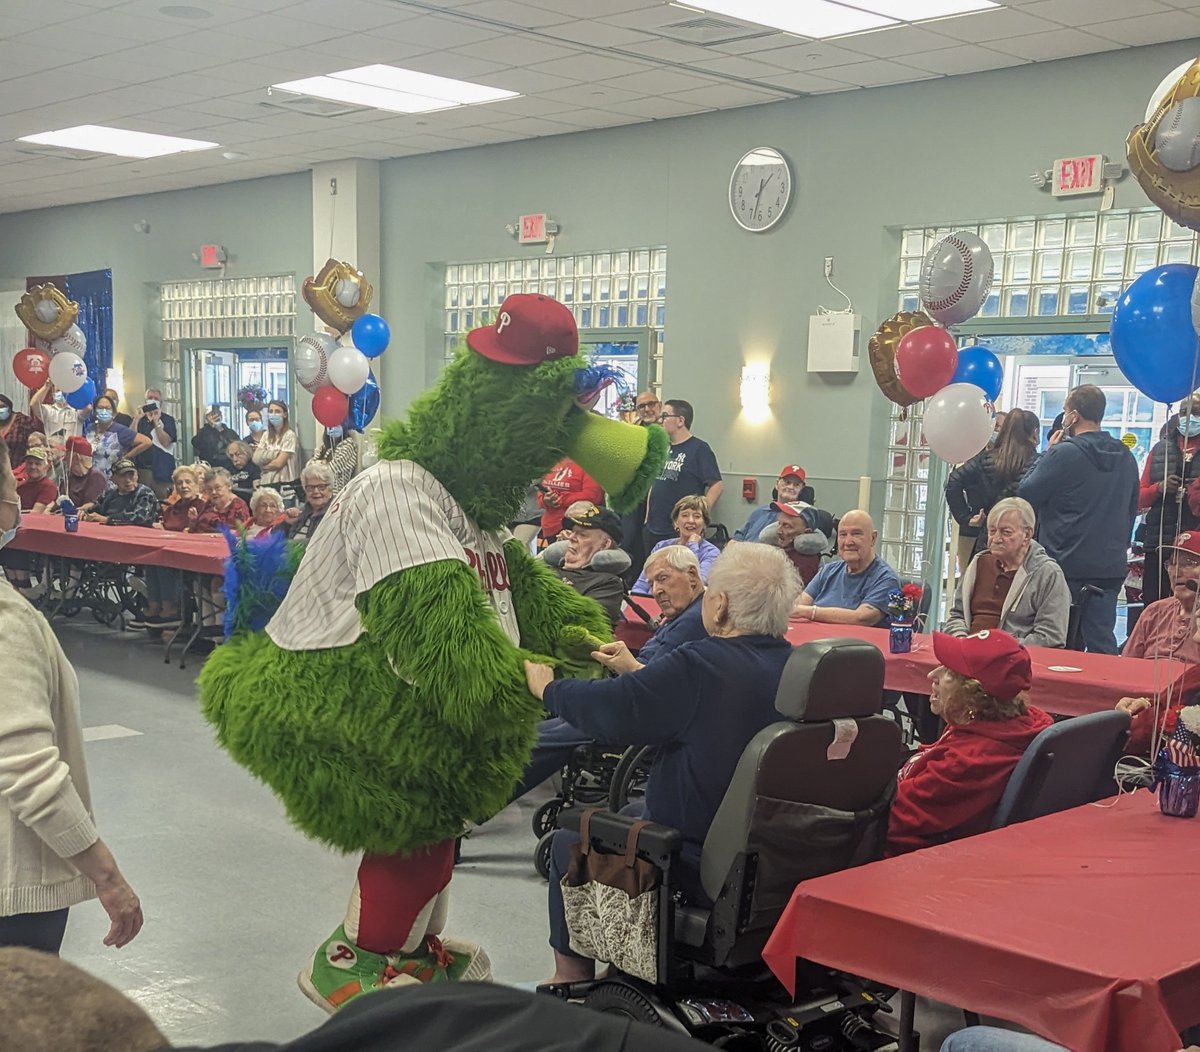 The New Jersey Veterans Memorial Home at Vineland wants to thank the @Phillies' Phanatic one more time for the visit (it was a real hit)! Your fans wish you good luck this season! ⚾️